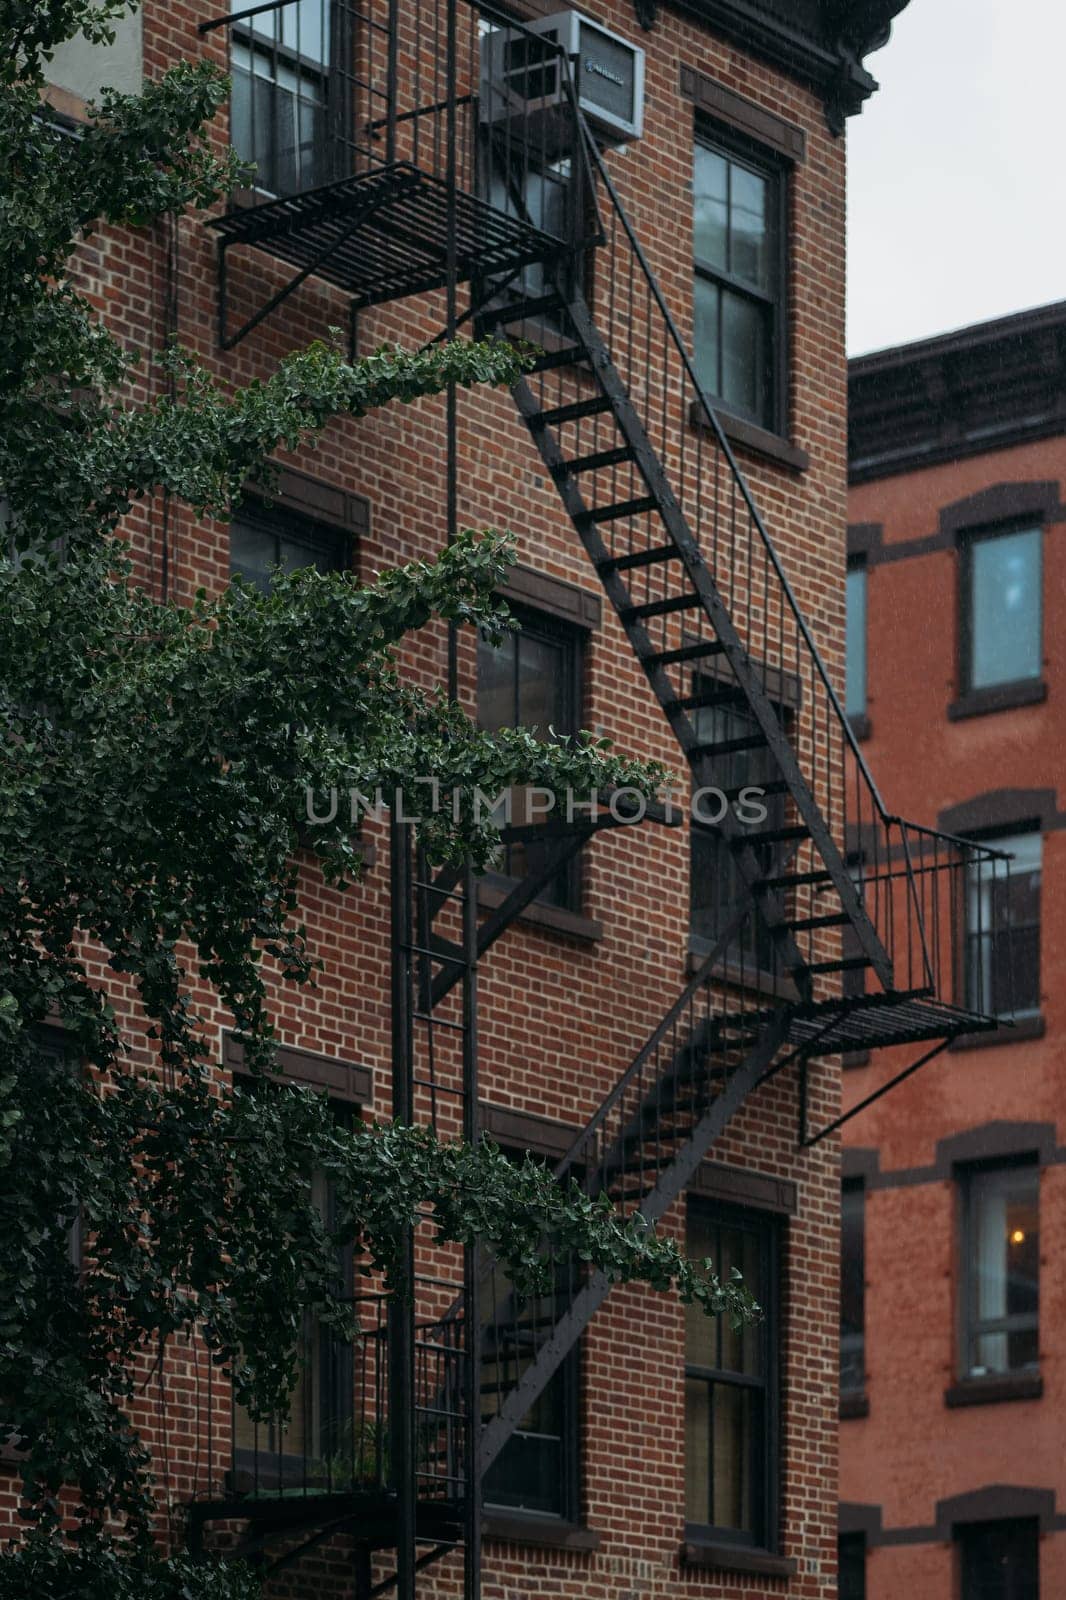 Rain-Soaked Fire Escape on a Brick Building in New York City by apavlin